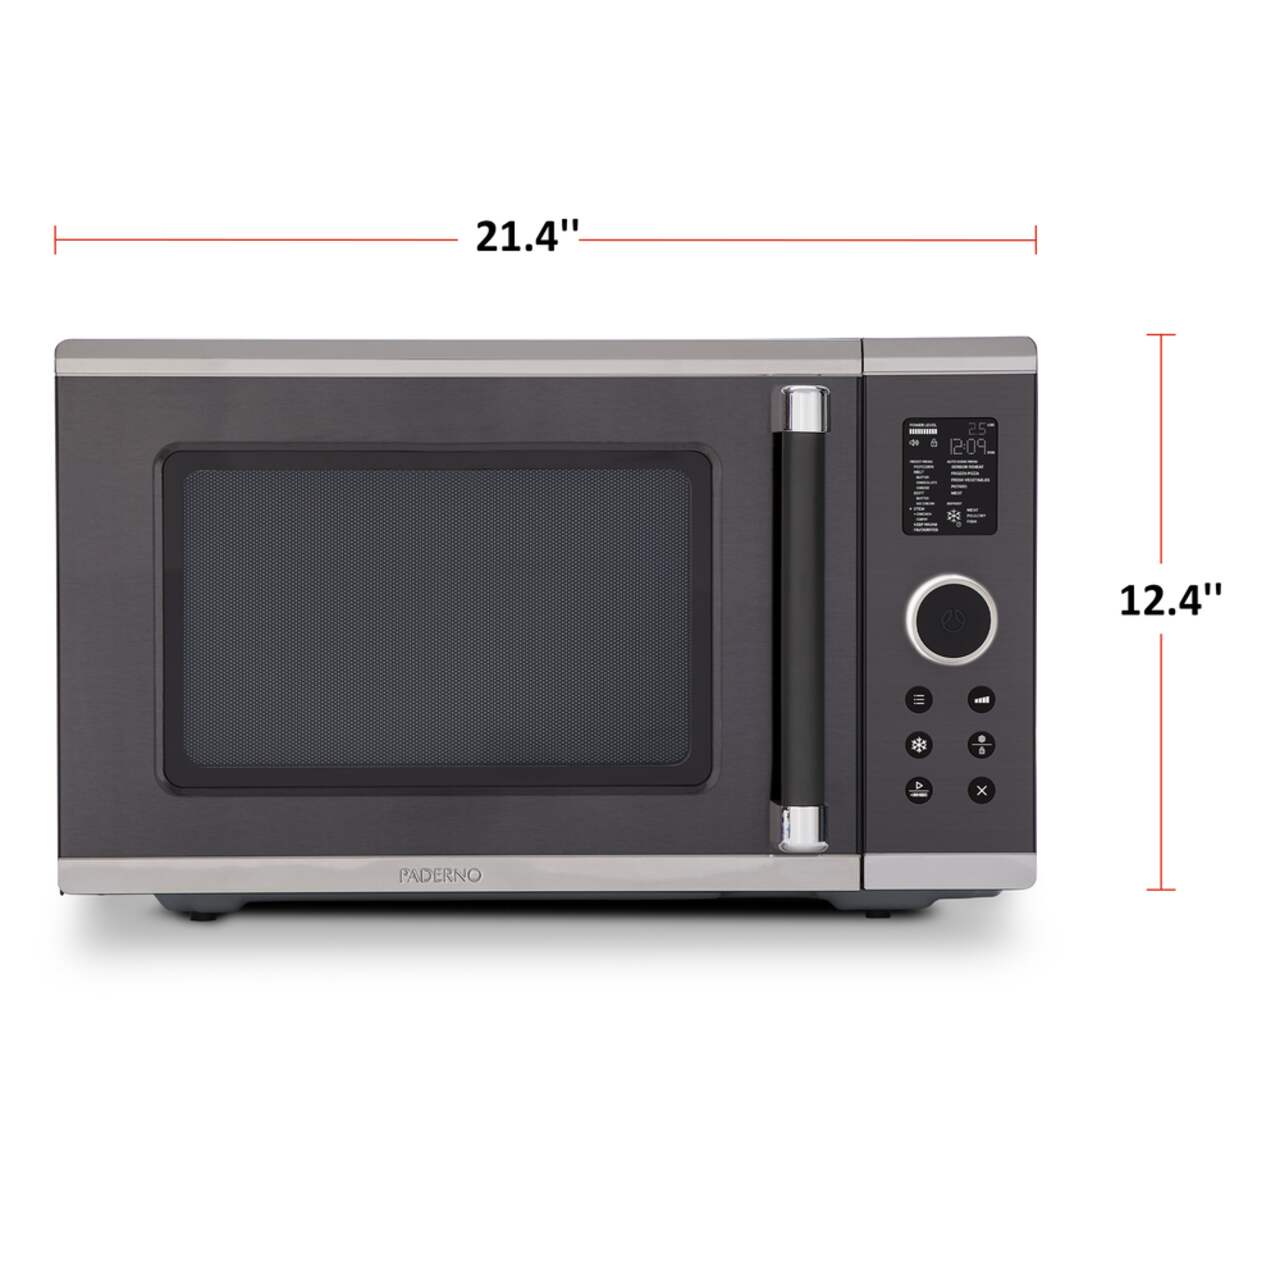 https://media-www.canadiantire.ca/product/living/kitchen/white-goods/0431026/paderno-1-3cu-ft-microwave-brushed-black-2b1e694b-b950-44ab-a402-88a55f44ec24.png?imdensity=1&imwidth=1244&impolicy=mZoom